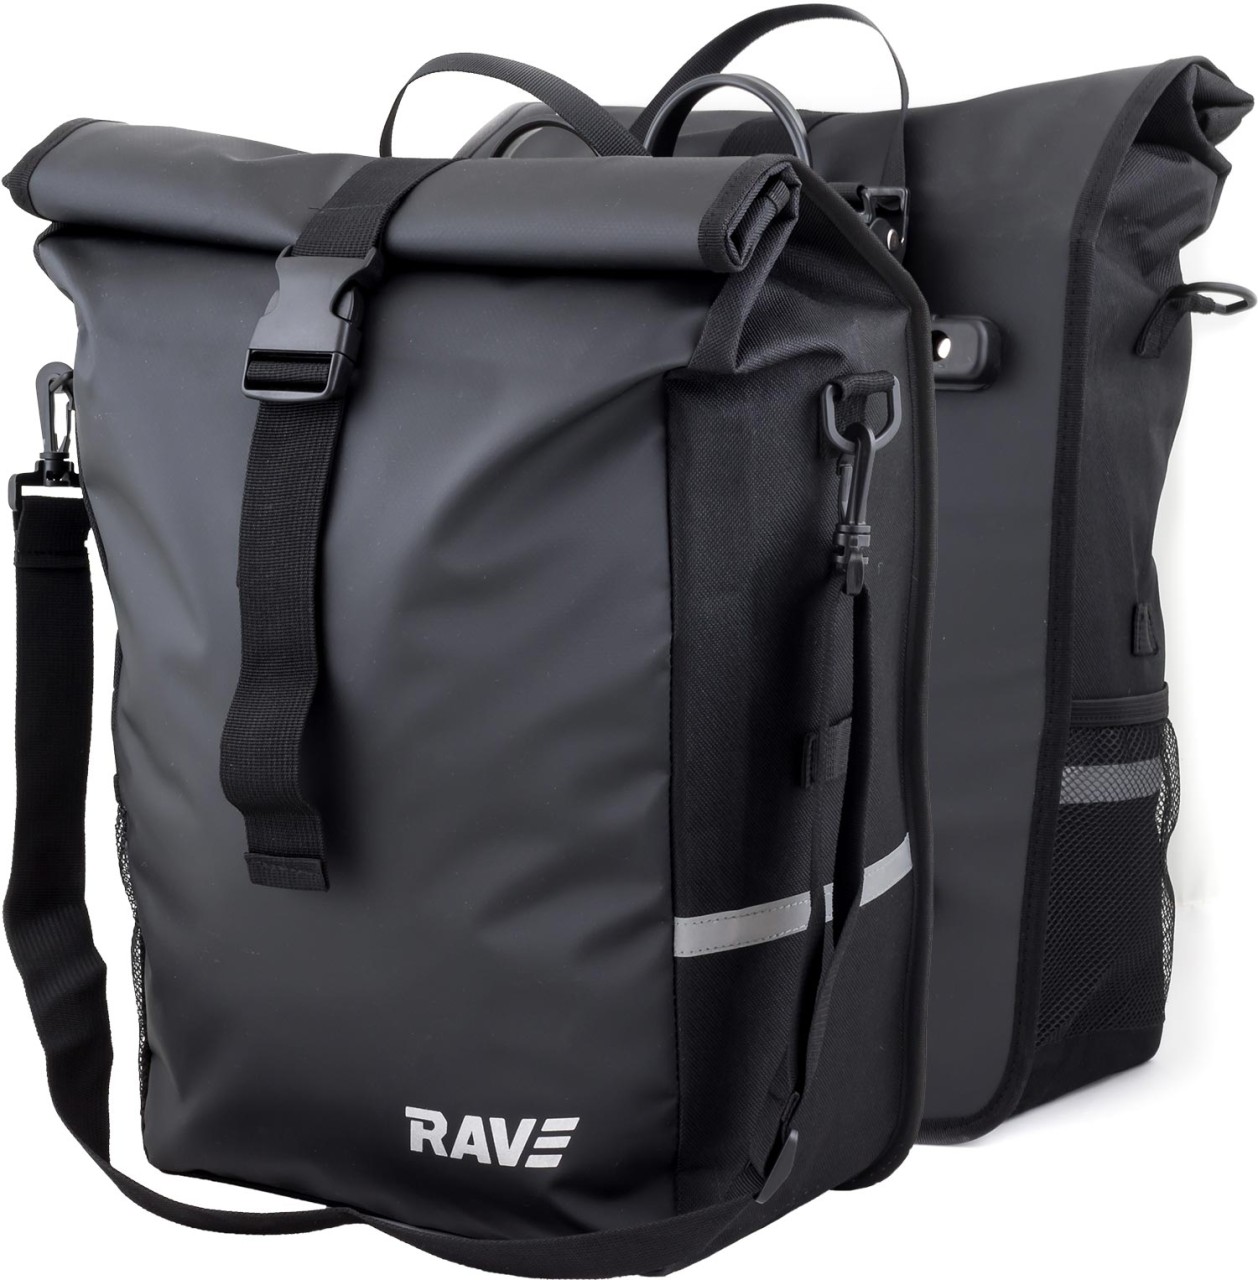 RAVE Rear bag Voyage - (pair) Easy-Click system